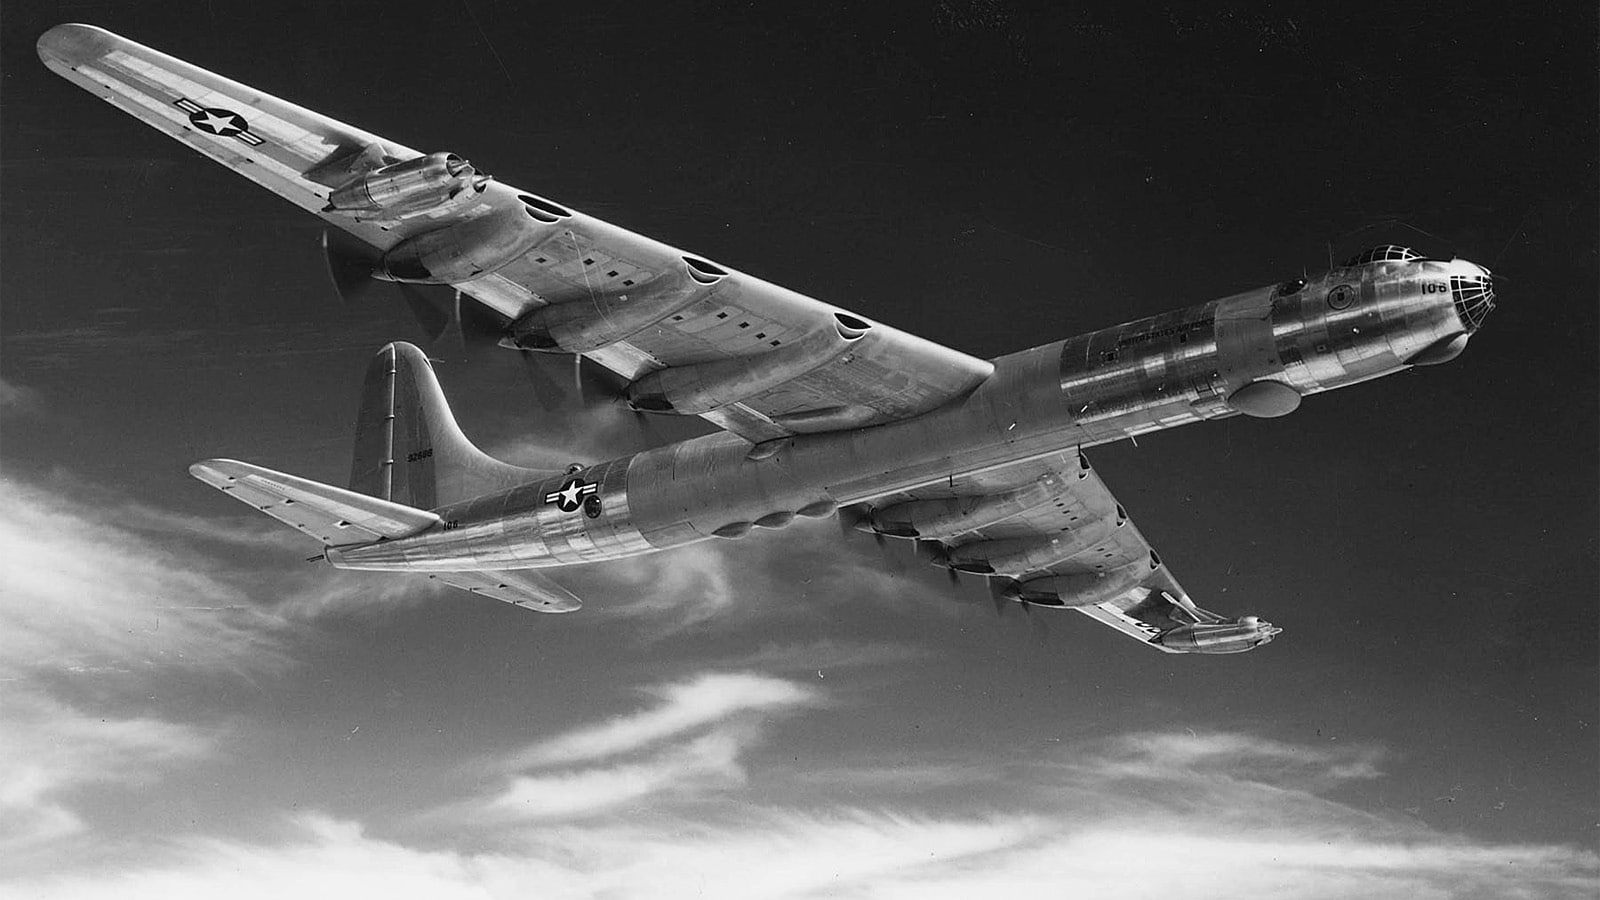 USAF’s horror year 1950, loss of 6 aircraft in 7 weeks, incl. a B-36 with Nuclear bomb!